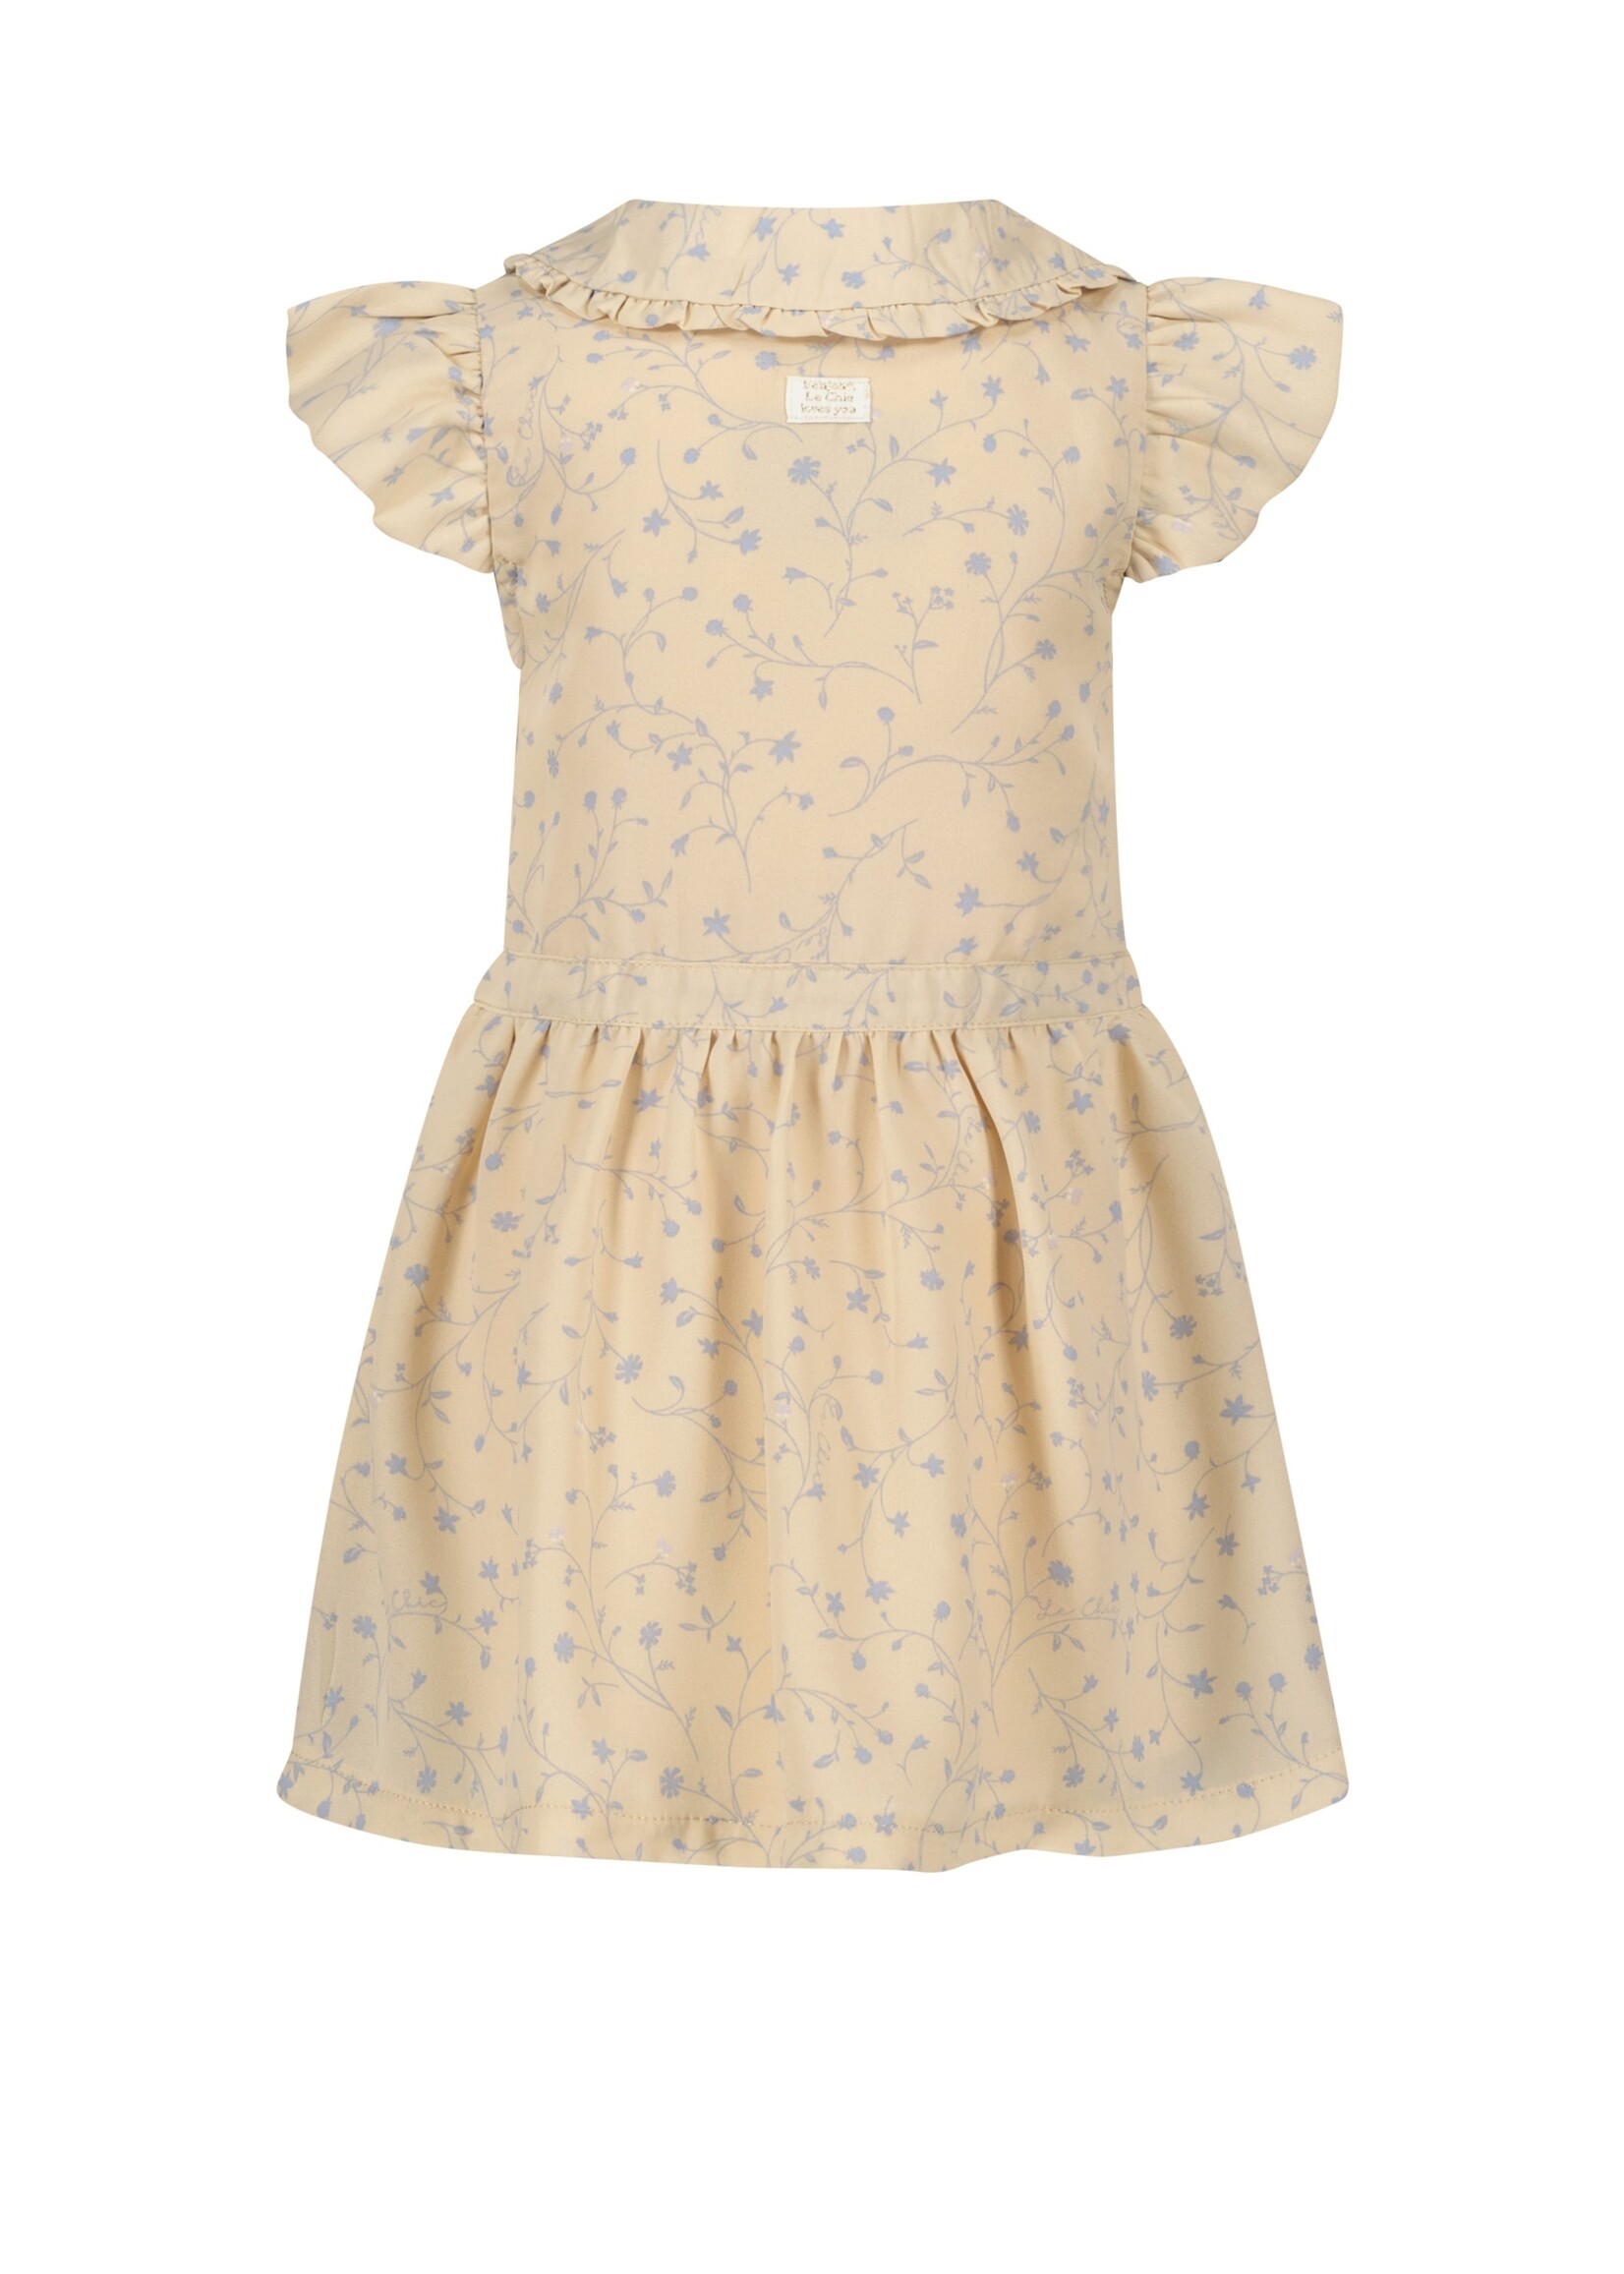 Le Chic Girls Baby C402-7871 SEBY wildflower voile dress Light Cappuccino